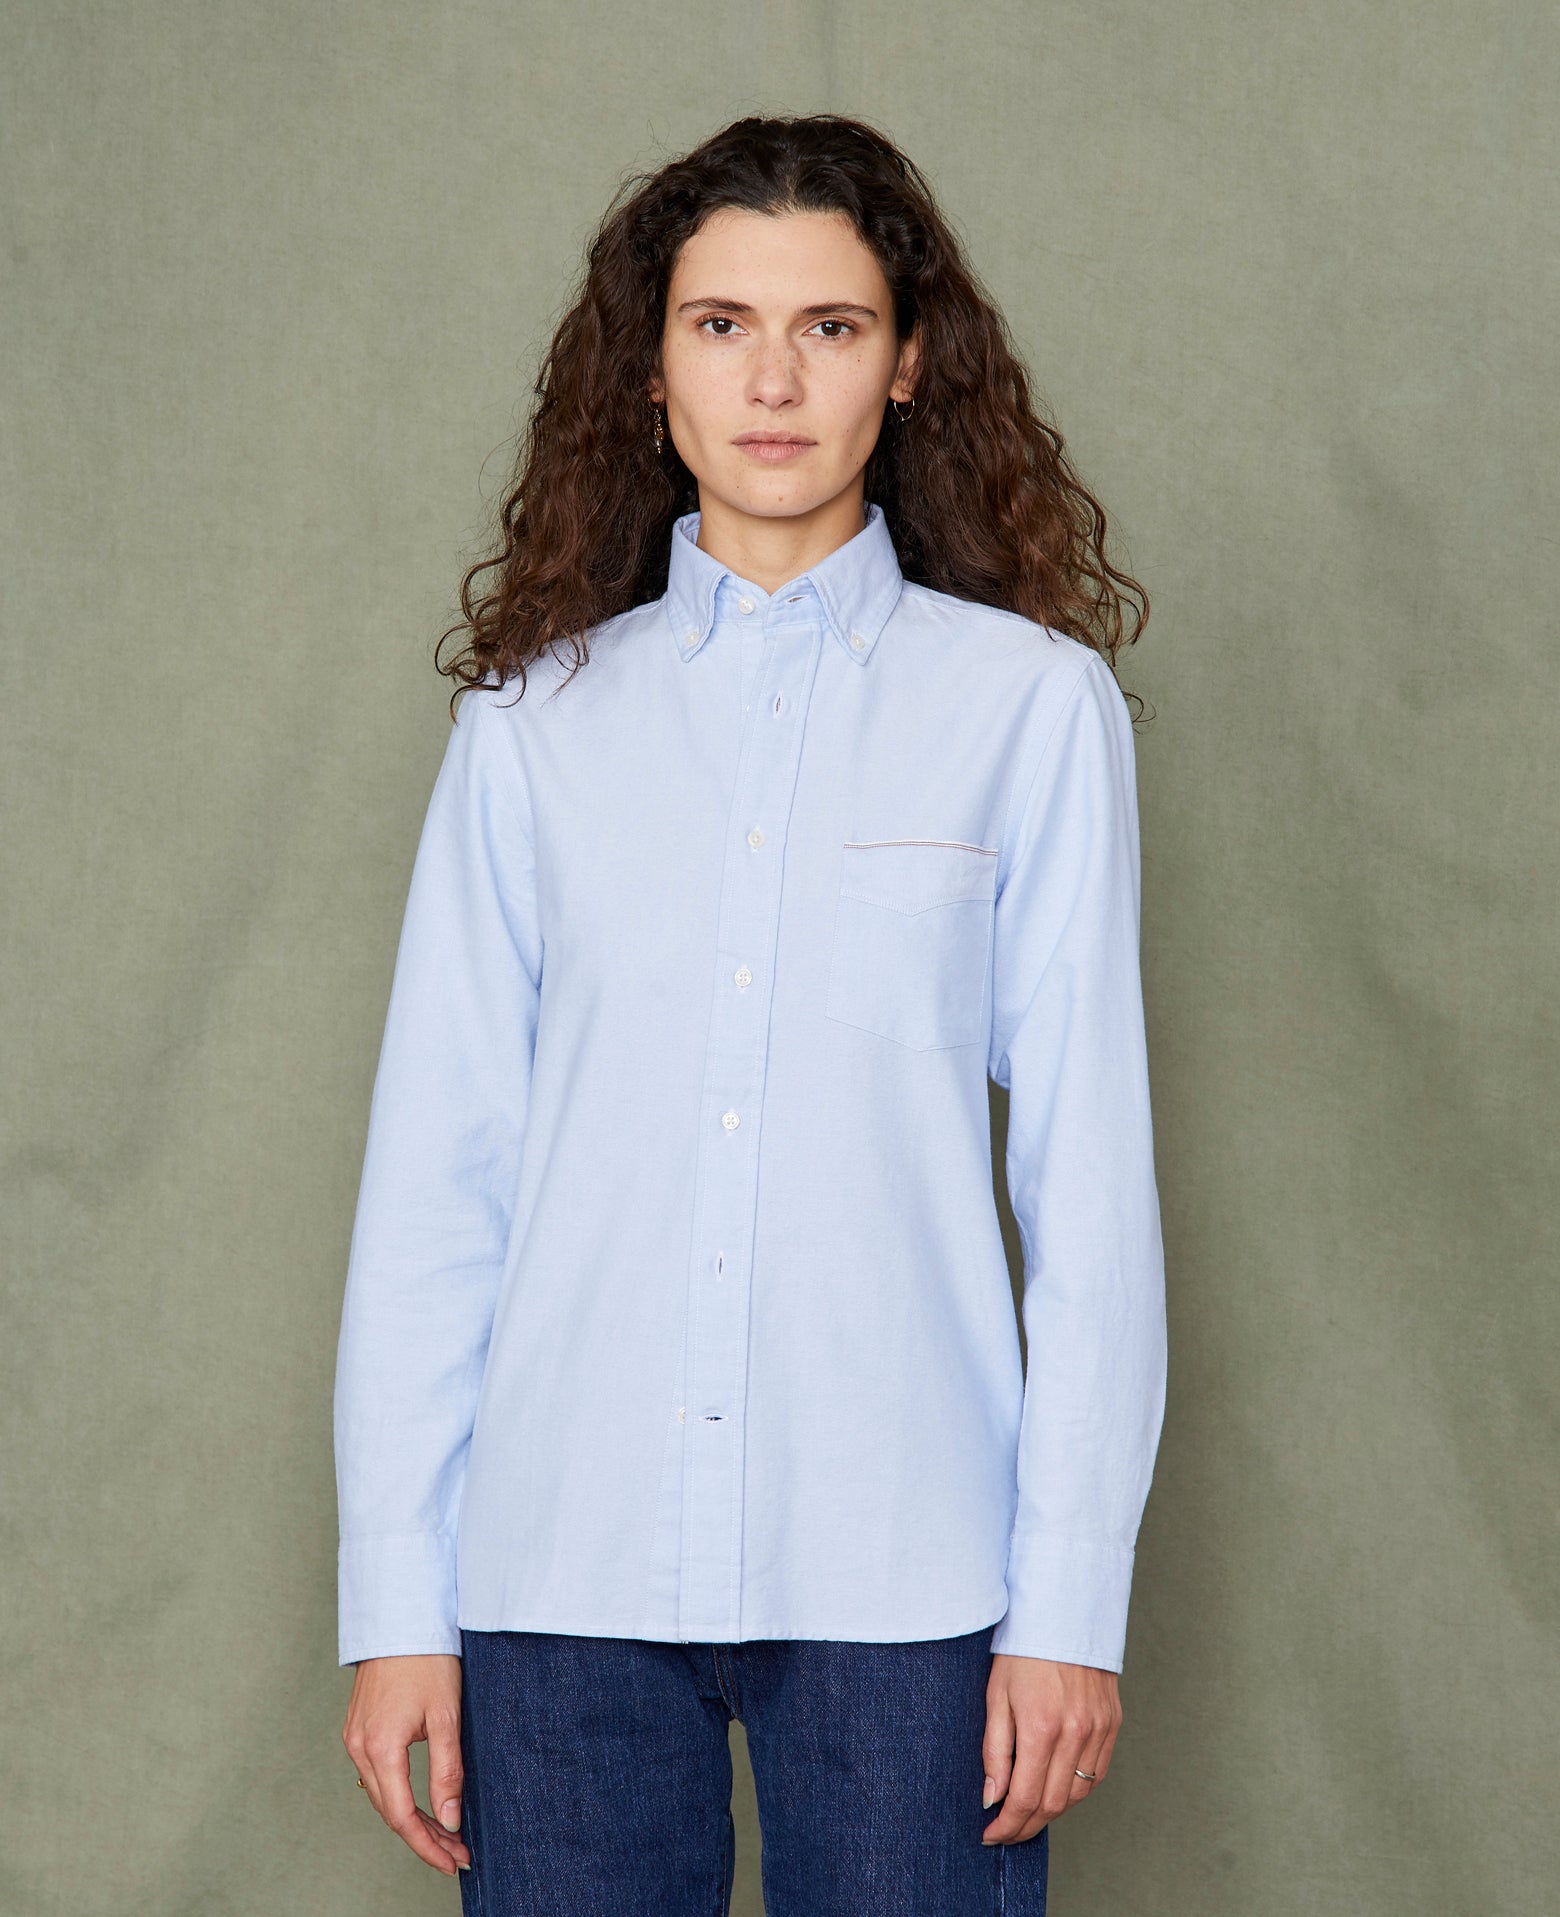 New button down shirt - Image 4